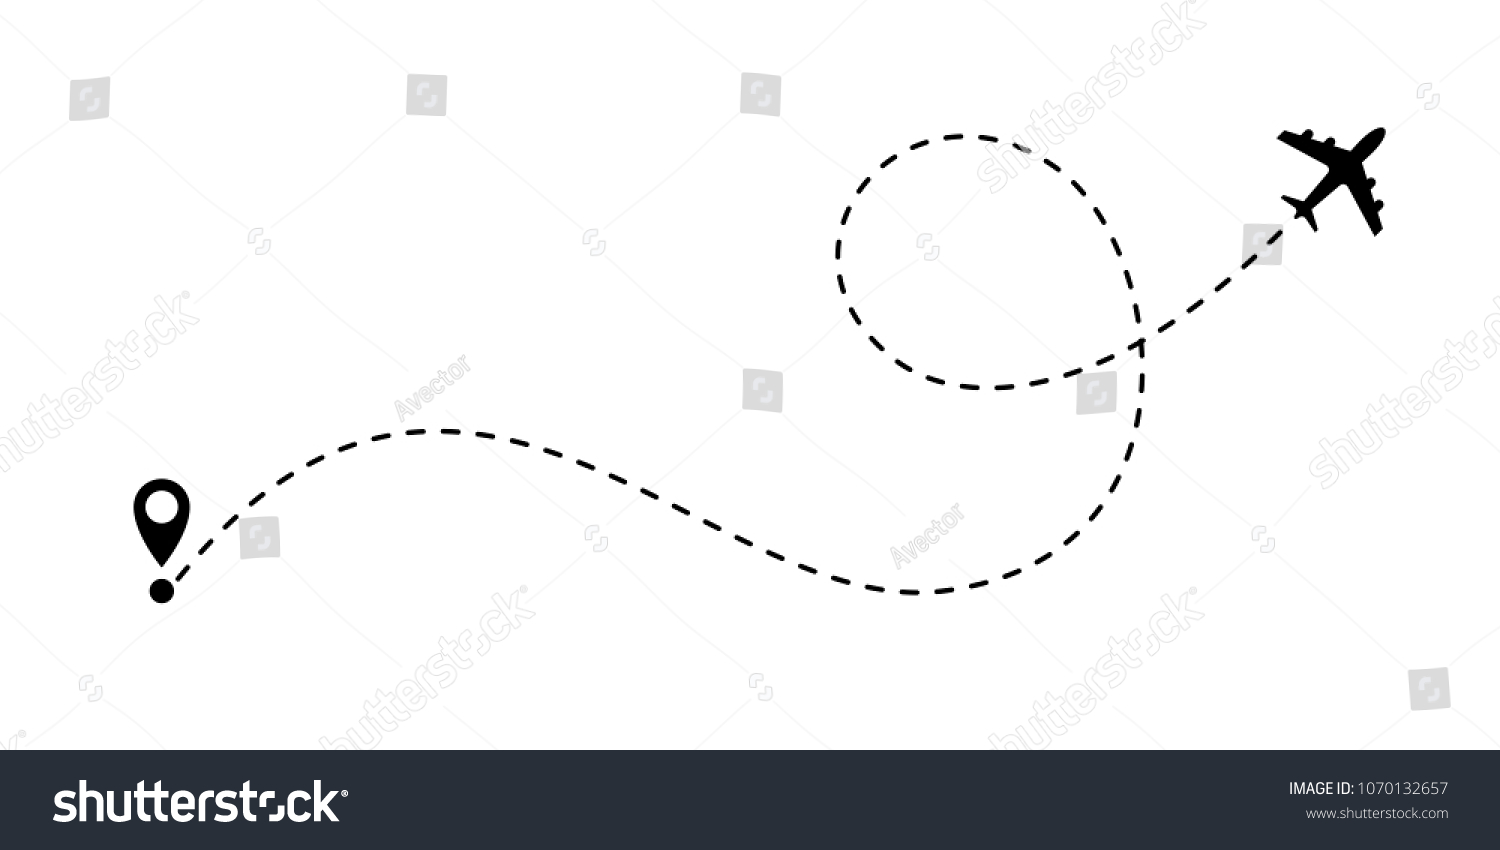 SVG of Airplane line path vector icon of air plane flight route with start point and dash line trace svg